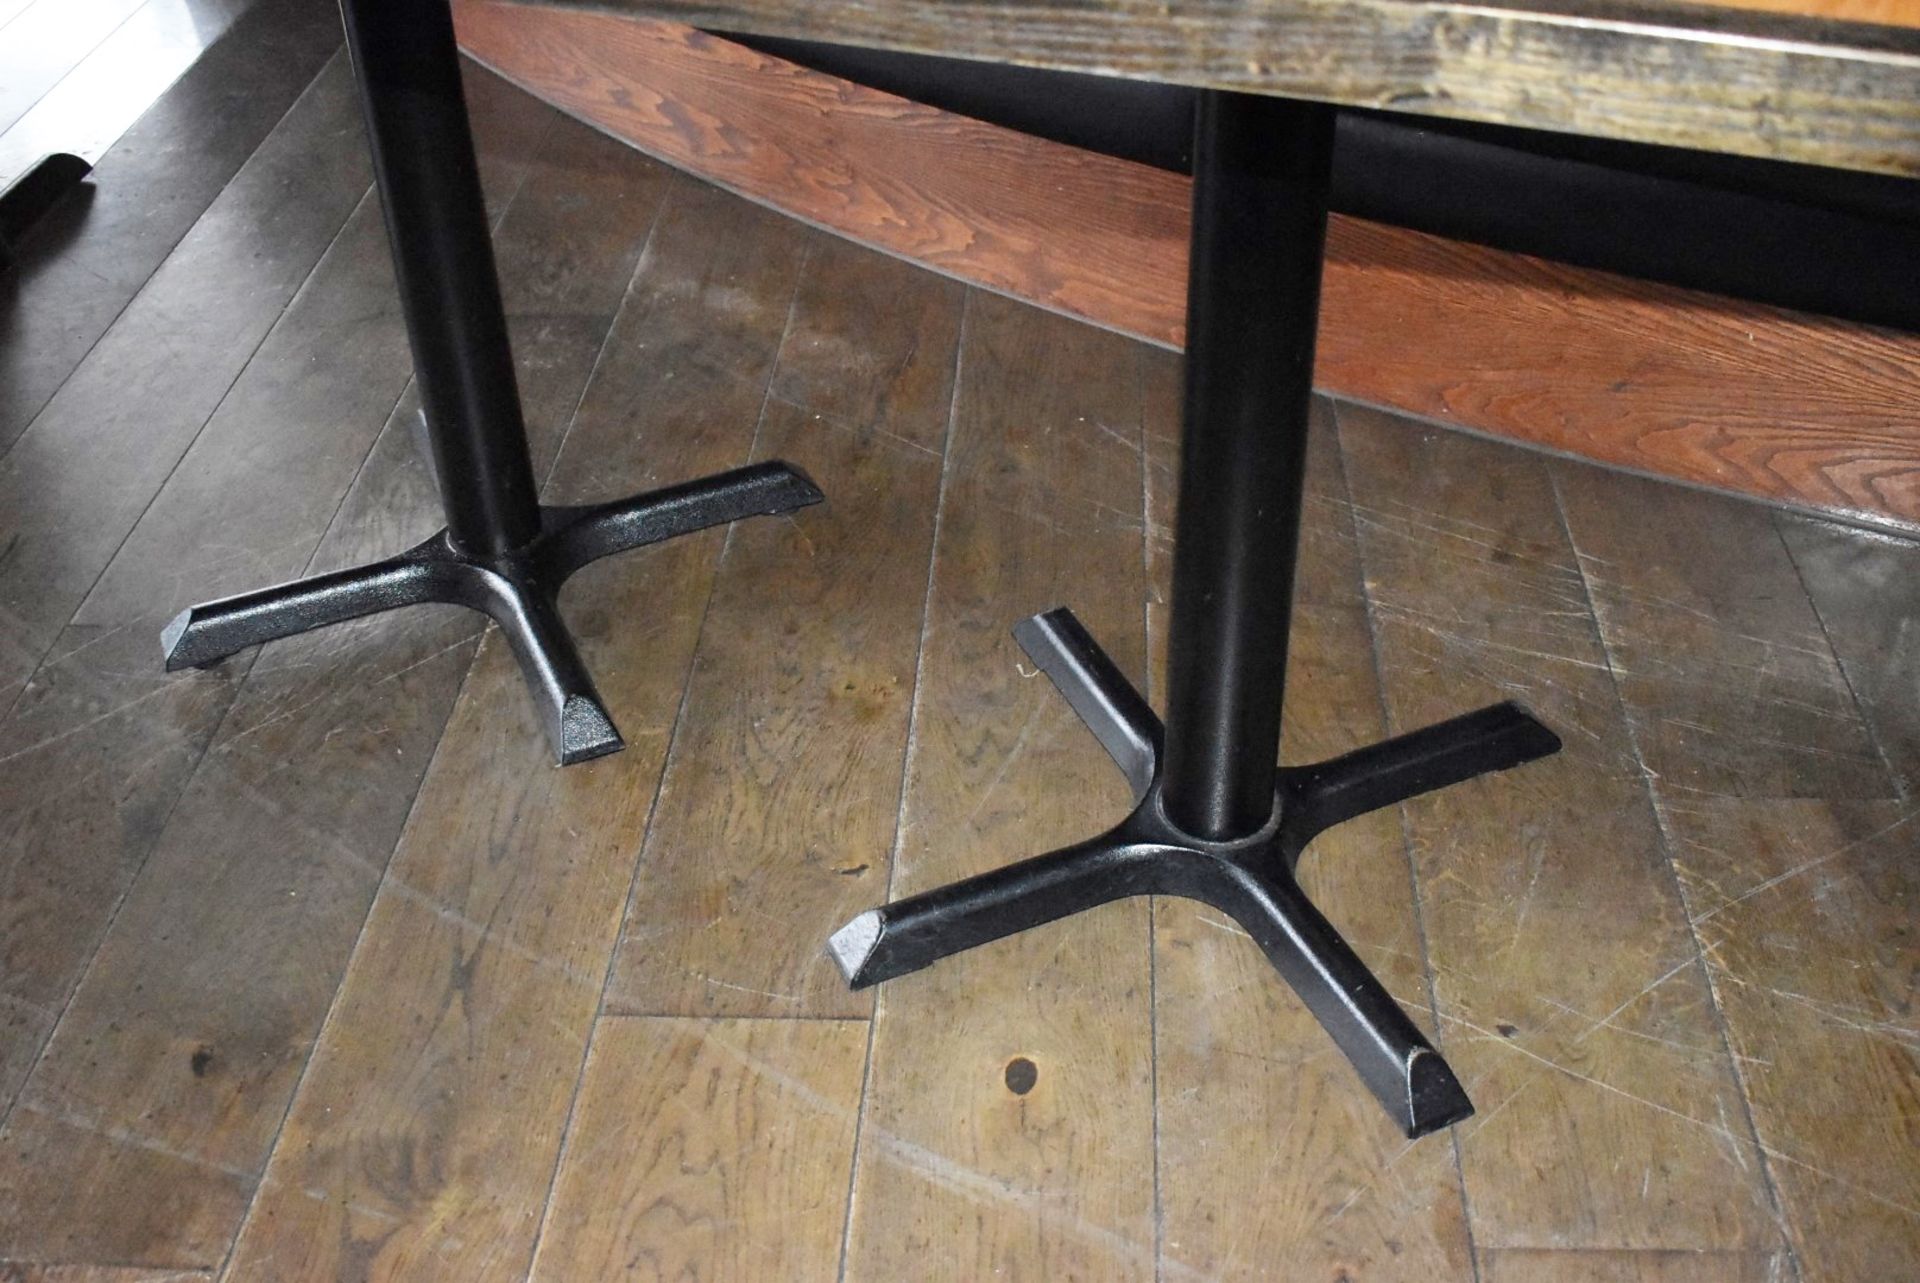 2 x Restaurant Dining Tables - Seats 2 Persons Per Table - Two Tone Wooden Top and Cast Iron Bases - Image 5 of 5